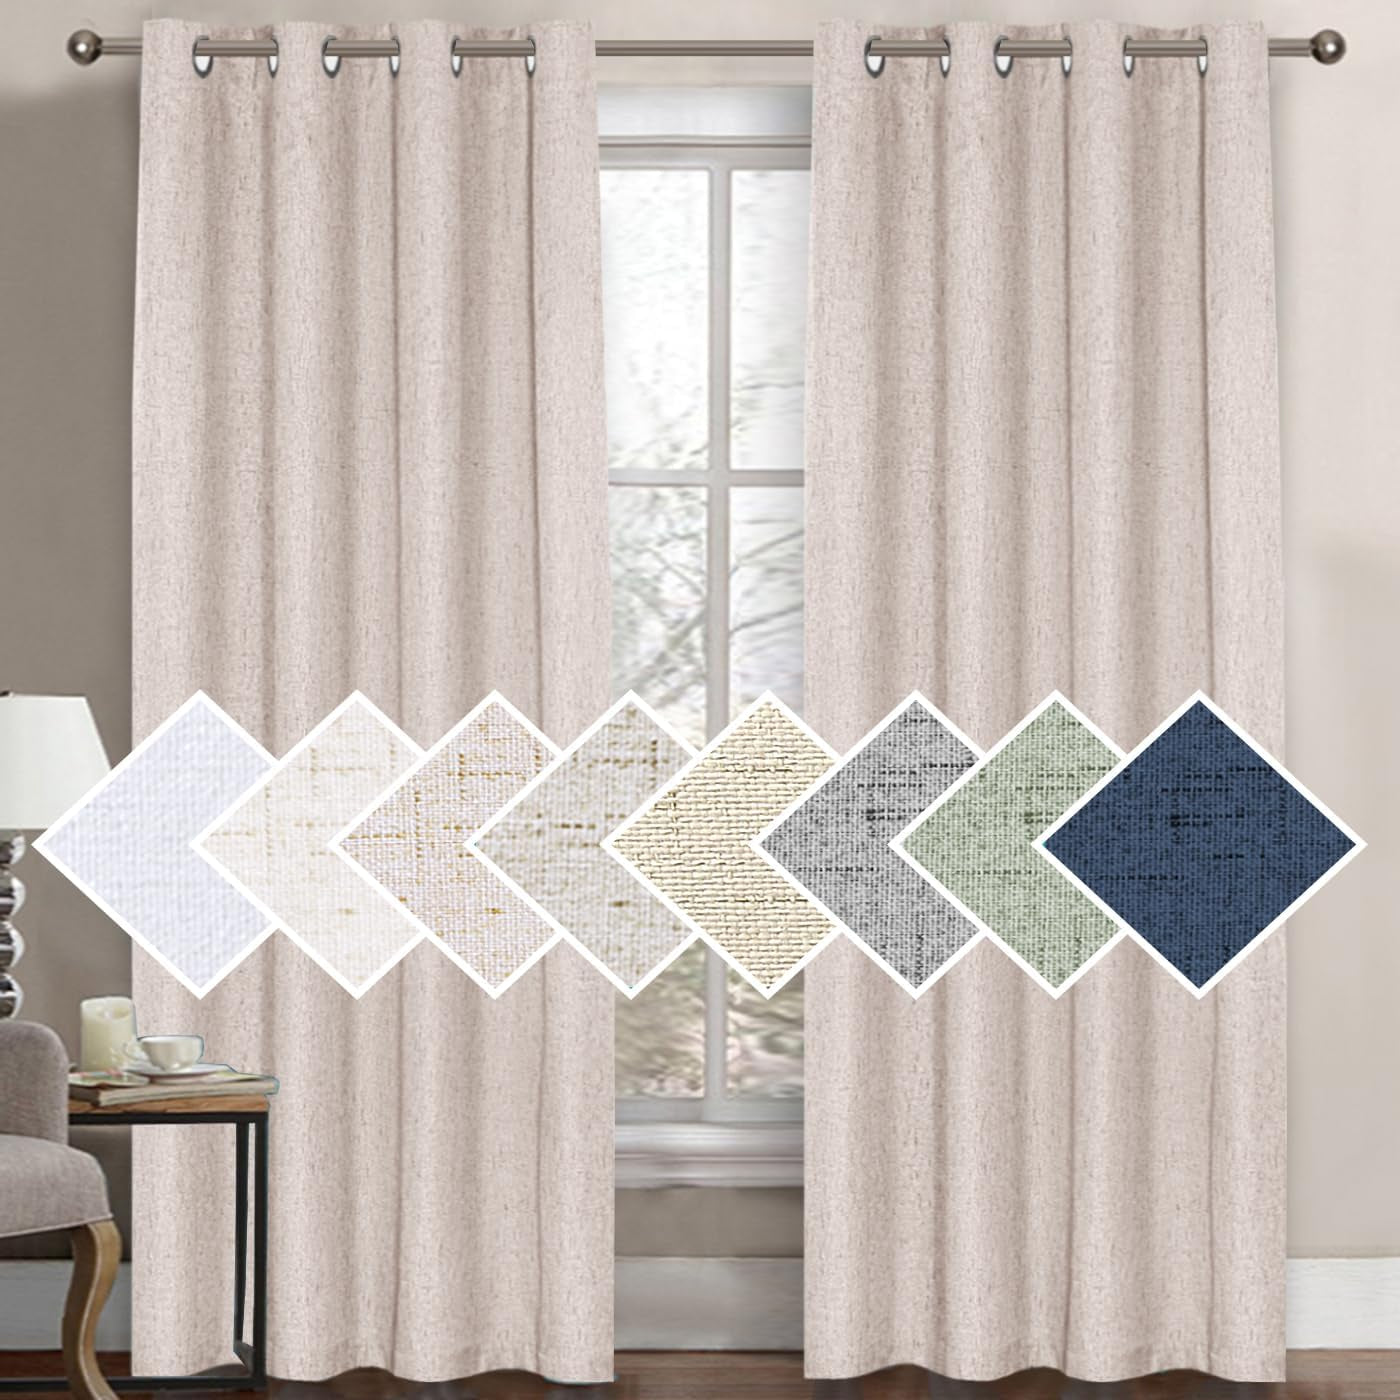 H.VERSAILTEX 100% Blackout Curtains for Bedroom Thermal Insulated Linen Textured Curtains Heat and Full Light Blocking Drapes Living Room Curtains 2 Panel Sets, 52X84 - Inch, Natural  H.VERSAILTEX Natural 1 Panel - 52"W X 96"L 